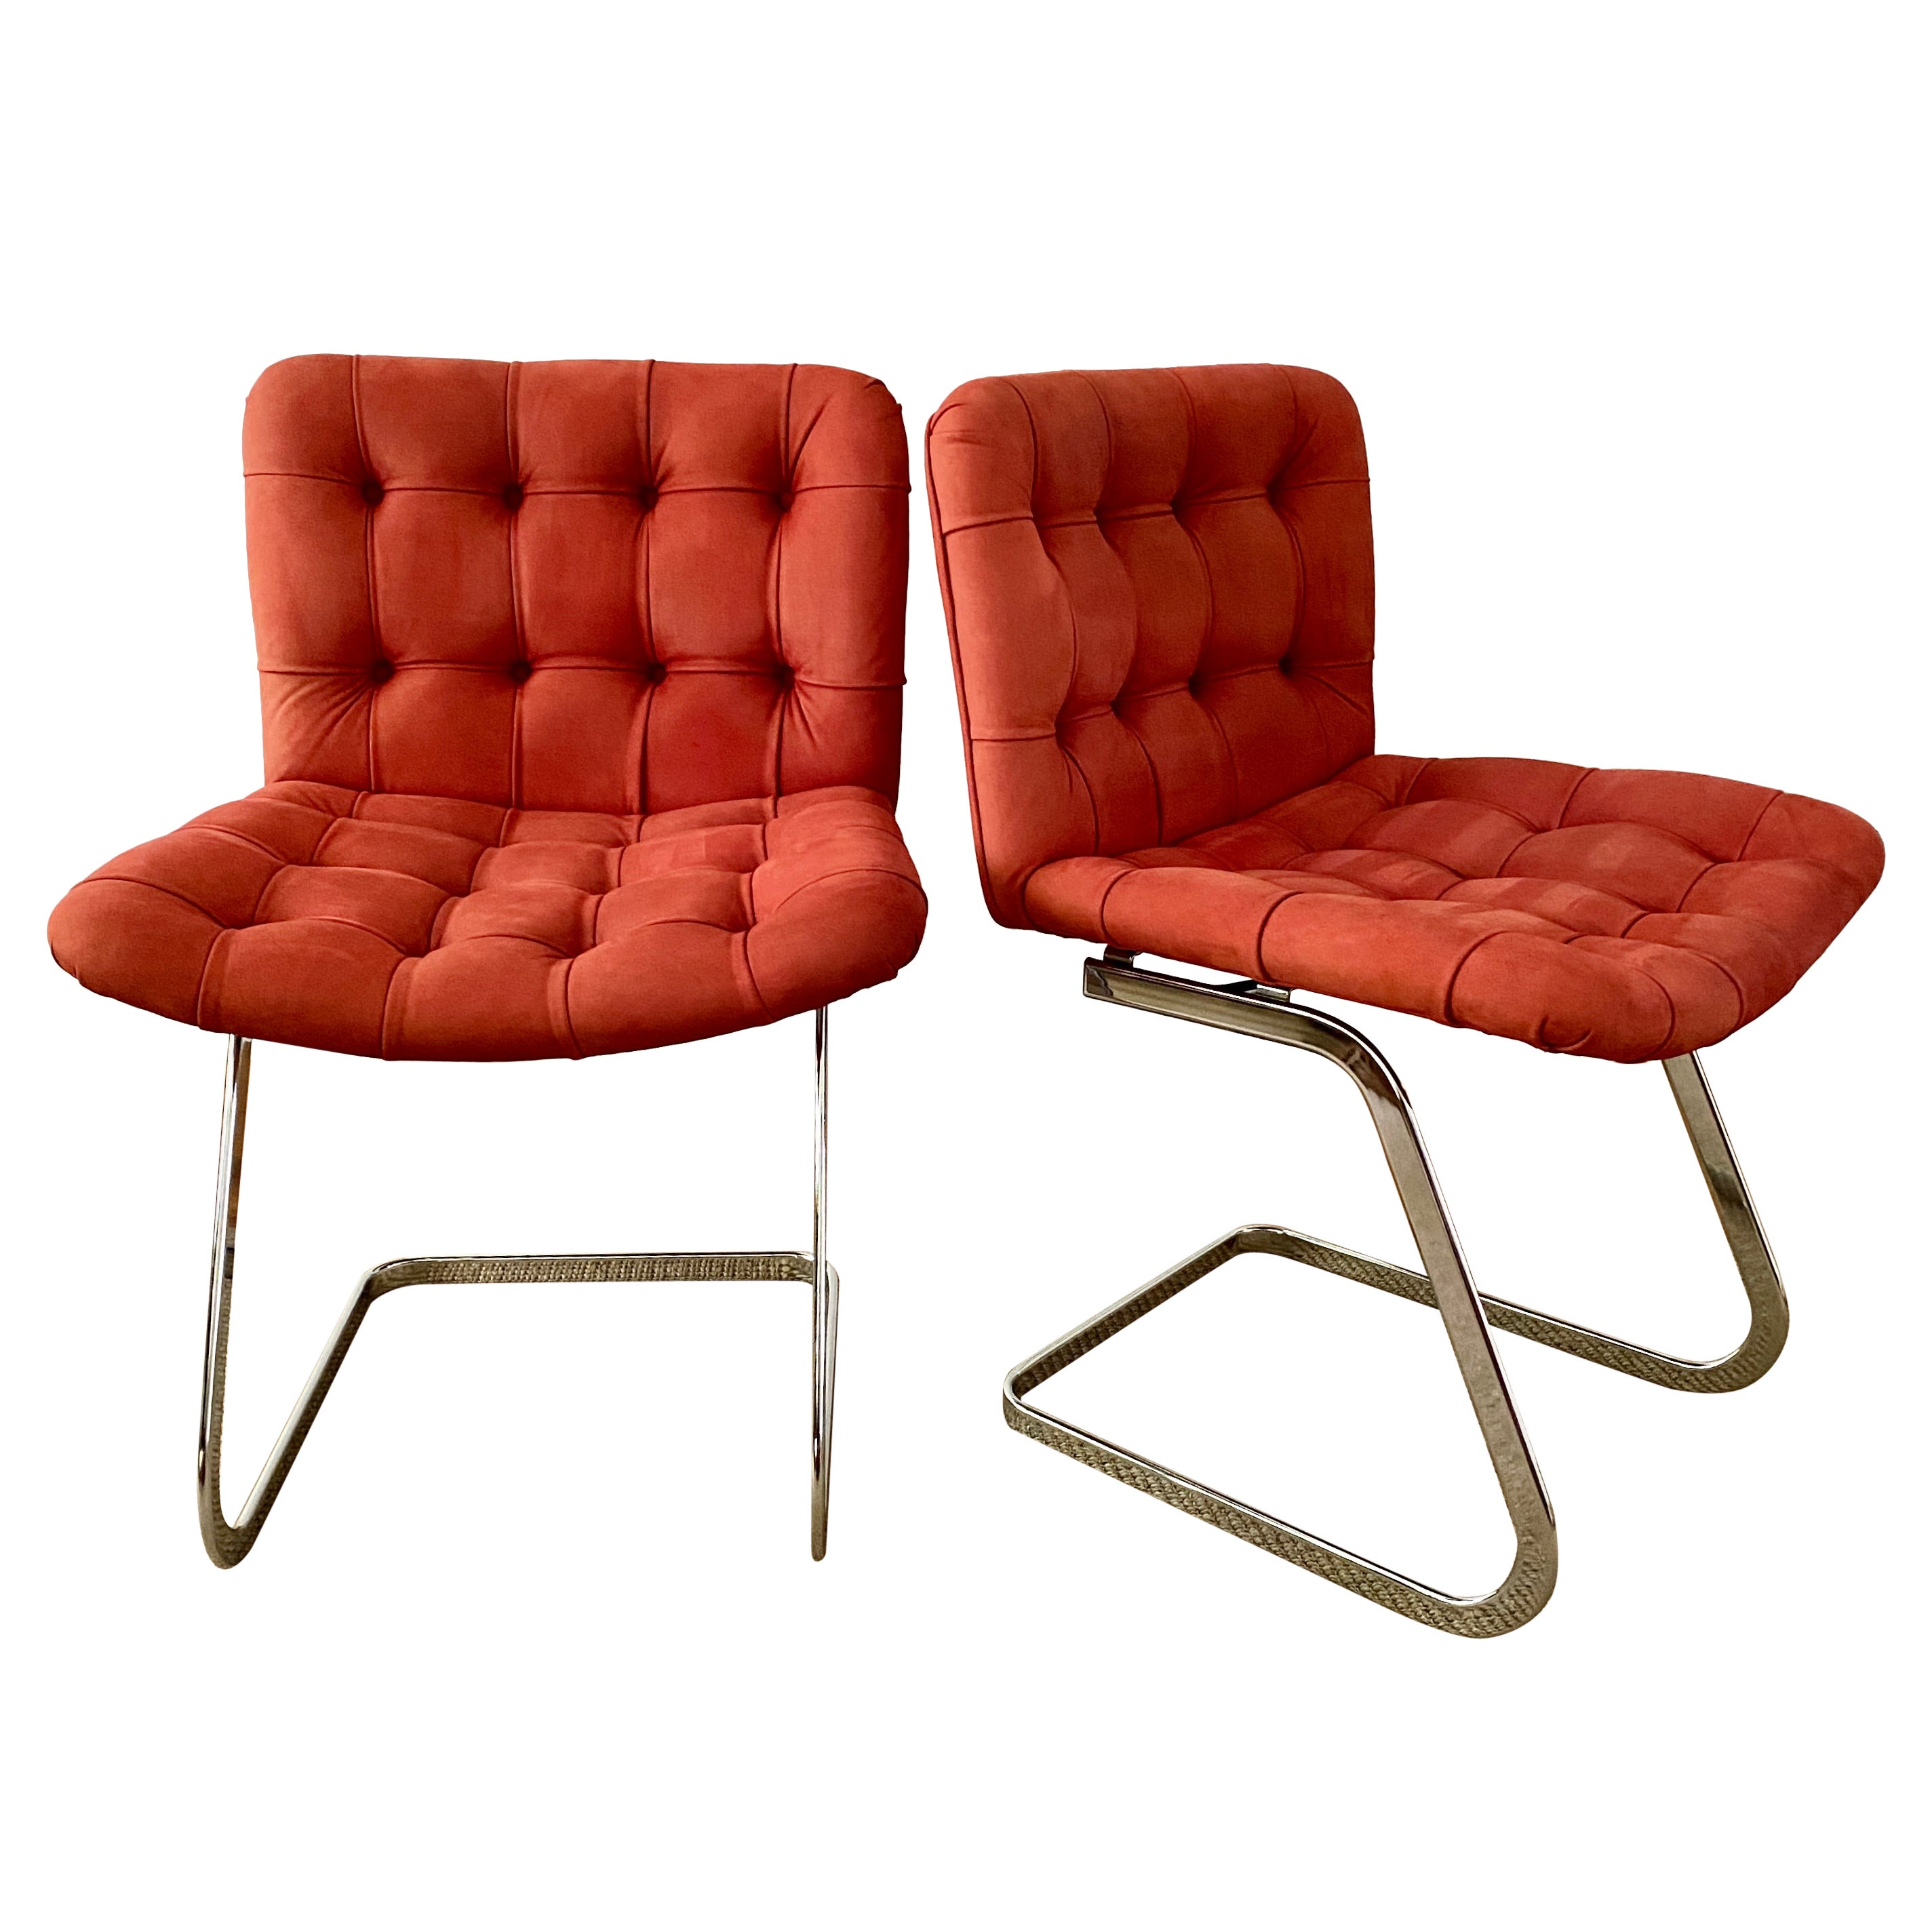 Pair Suede Leather Cantilever Chairs Designed By Robert Haussmann For de Sede